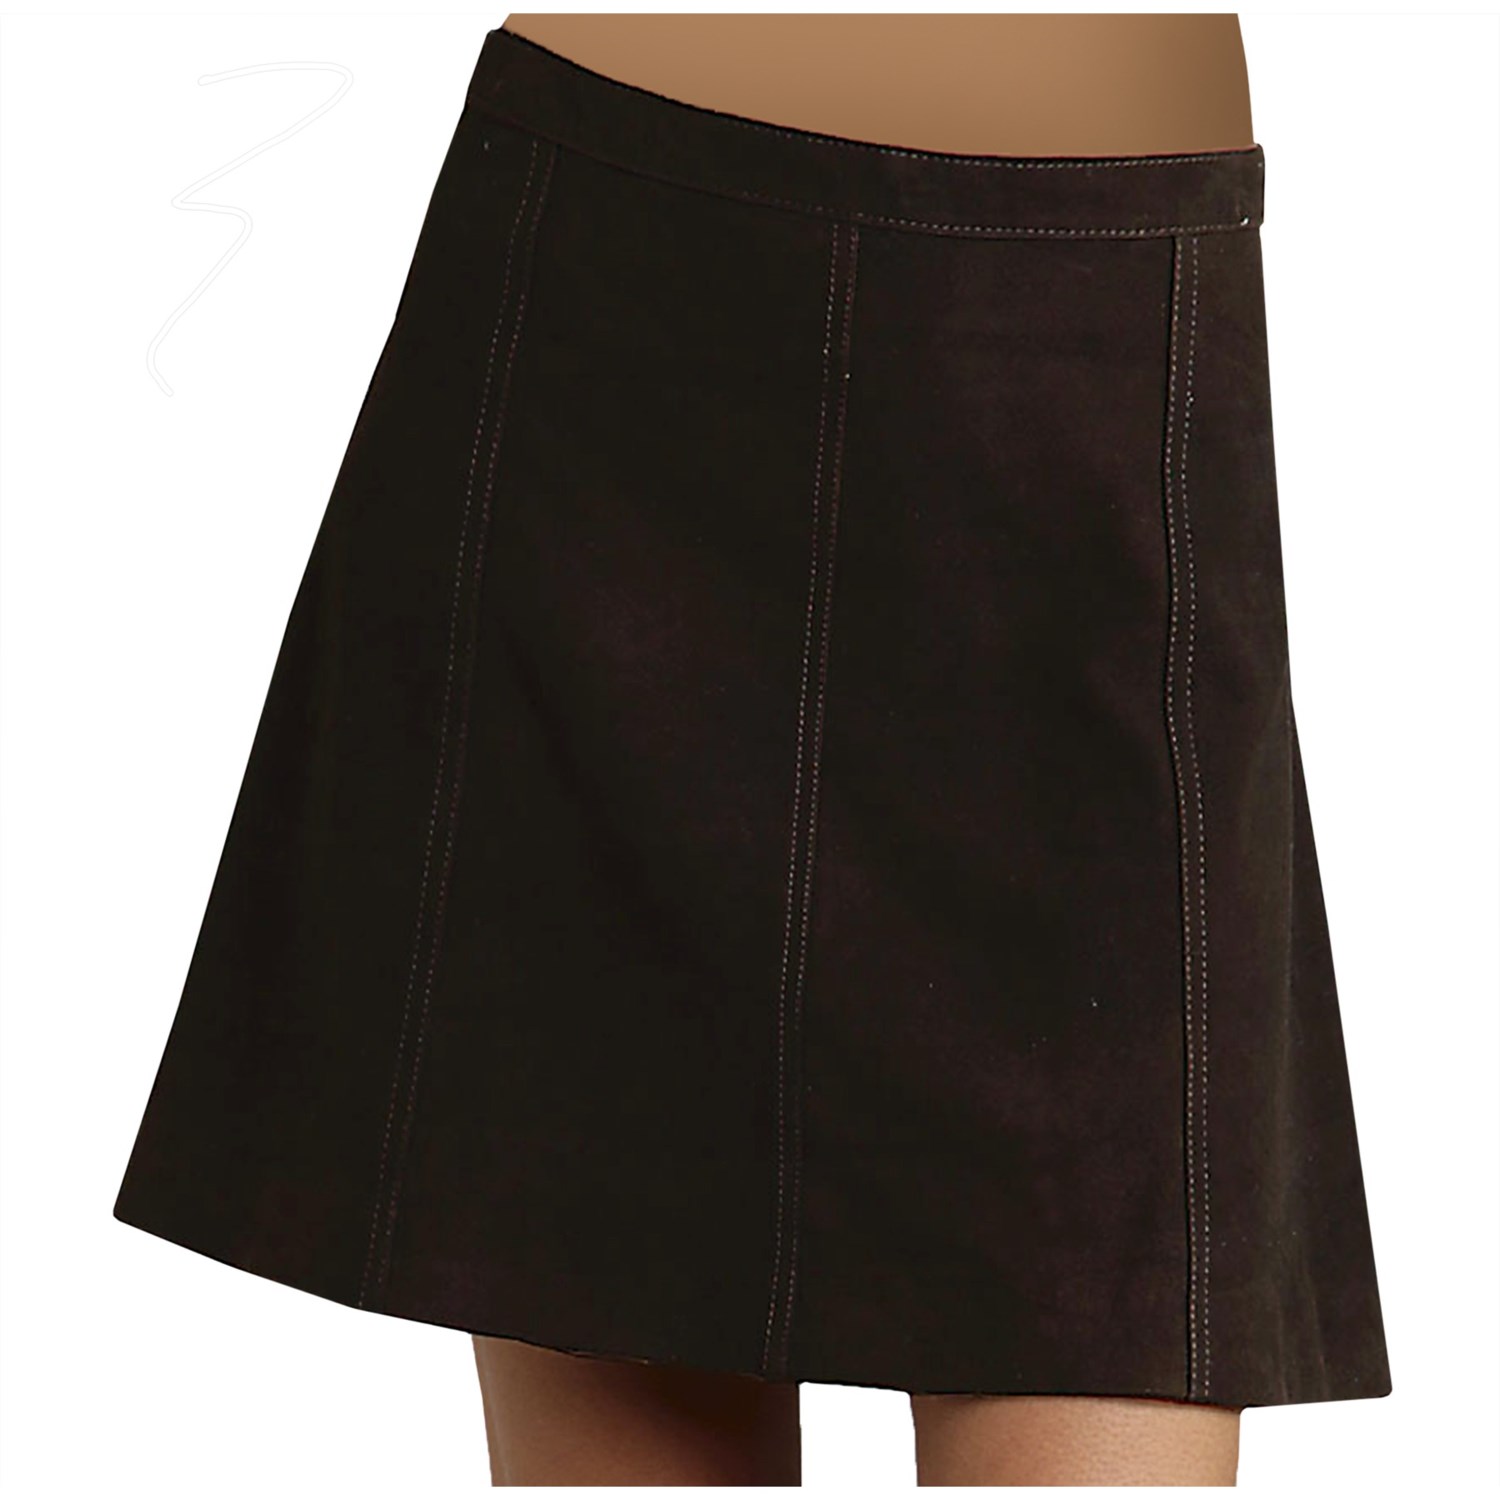 Stetson Gored Suede Skirt (For Women) 6392G - Save 79%